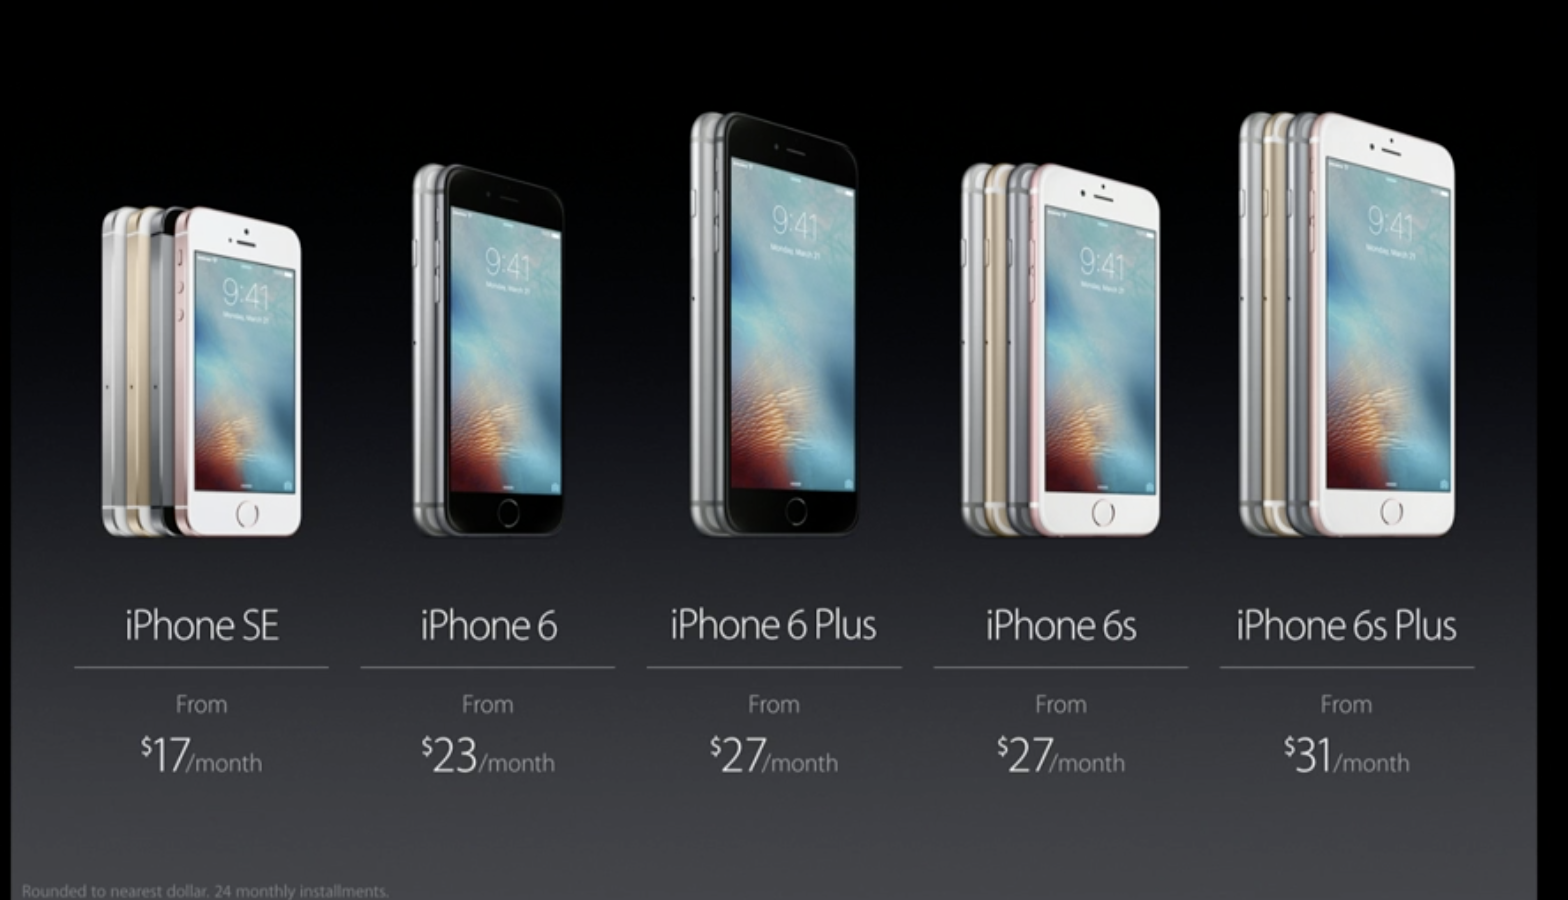 Apple iPhone SE availability & pricing preorders Mar. 24 starting at